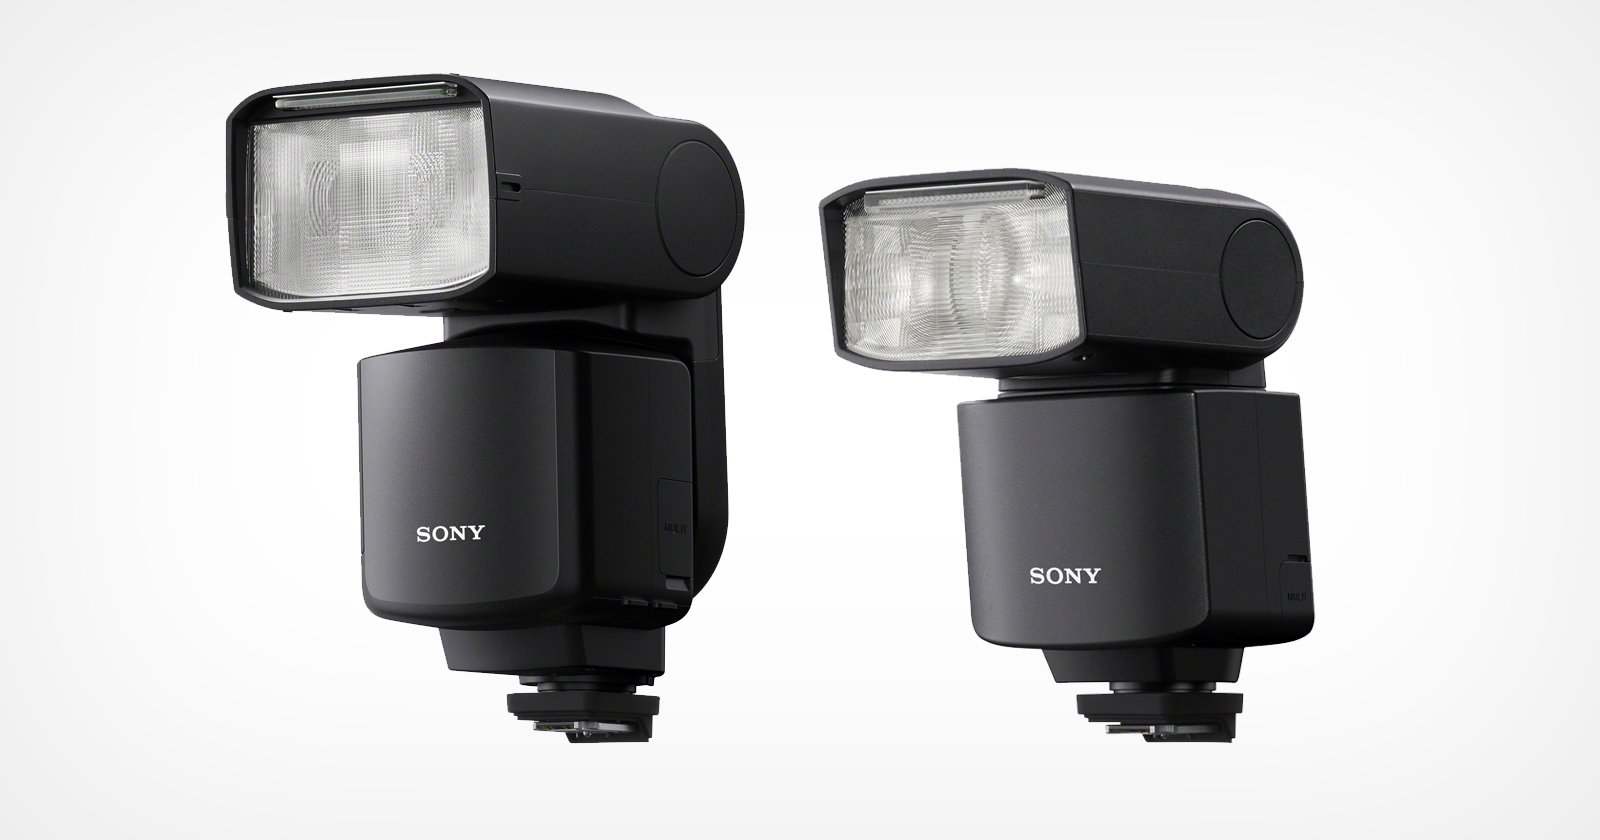 Sony Unveils Two New Flashes, the HVL-F60RM2 and HVL-F46RM